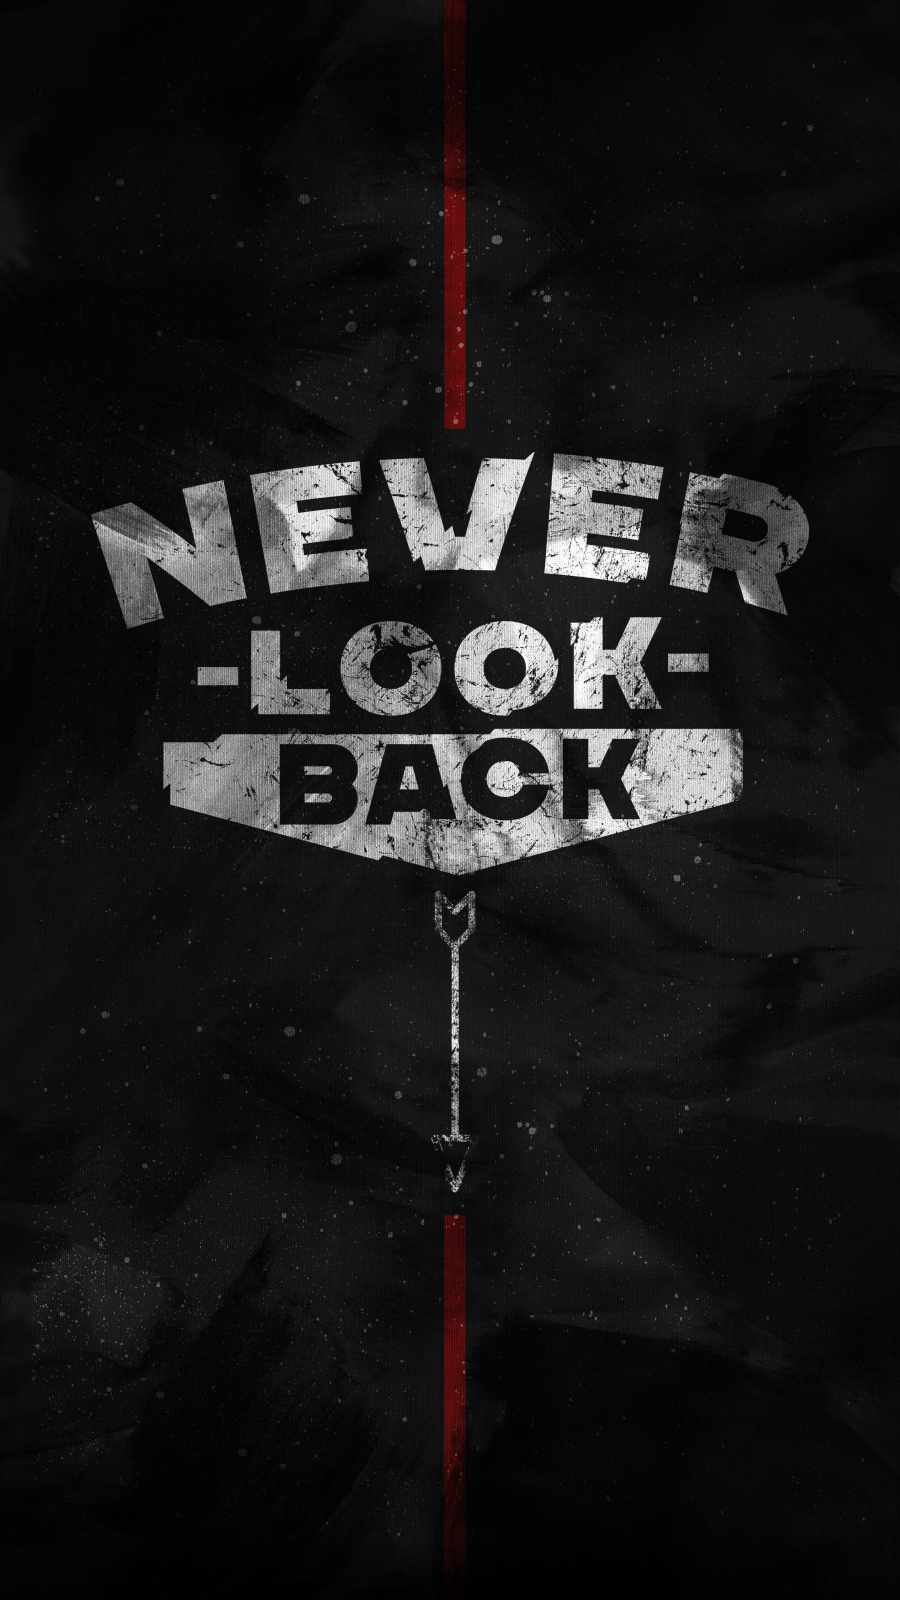 Never Look Back IPhone Wallpaper - IPhone Wallpapers : iPhone Wallpapers